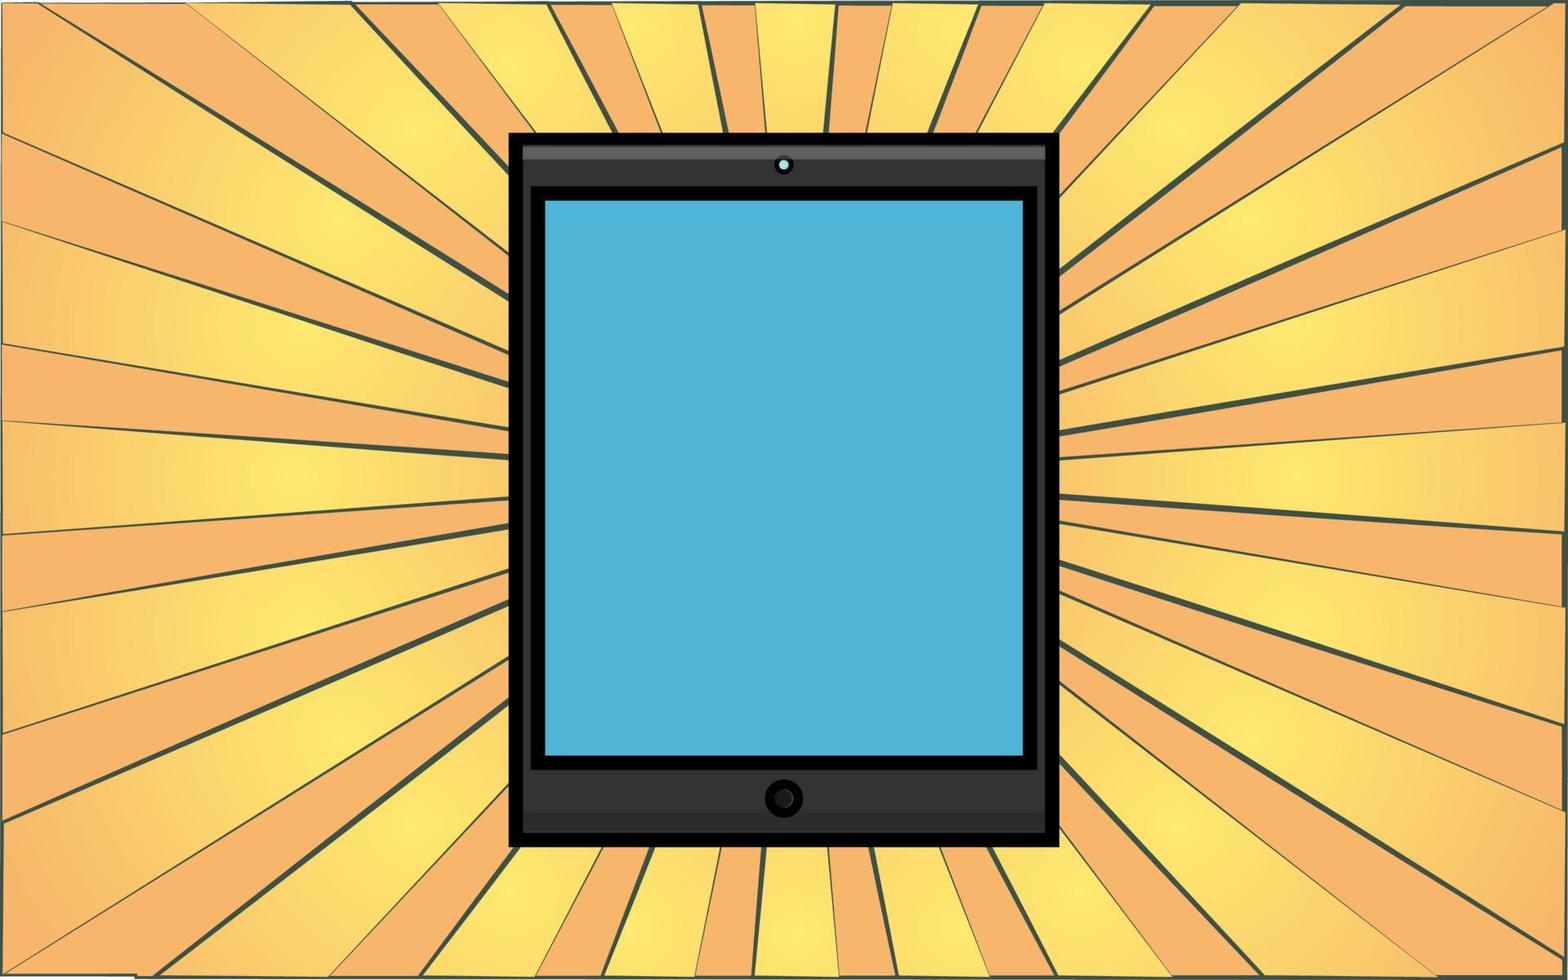 Modern digital mobile tablet on a background of abstract yellow rays. Vector illustration